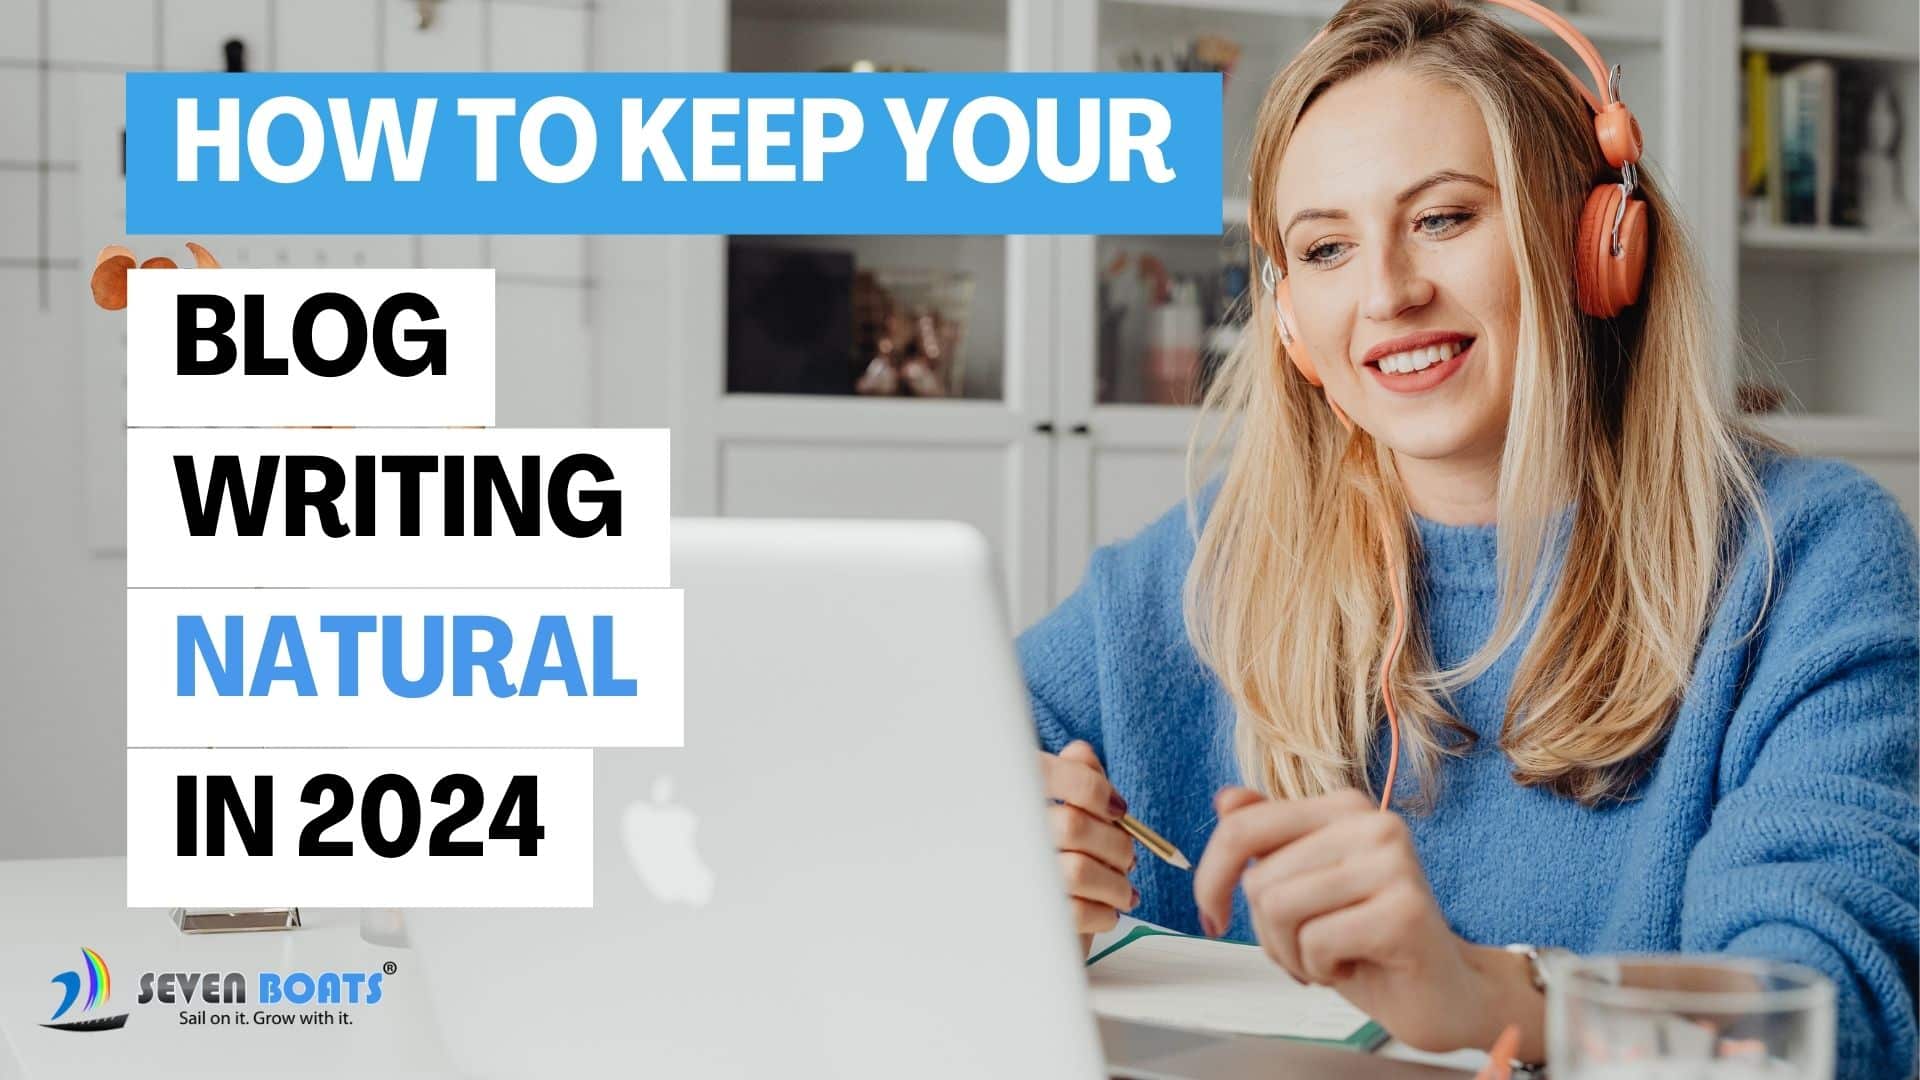 How to Keep Your Blog Writing Natural